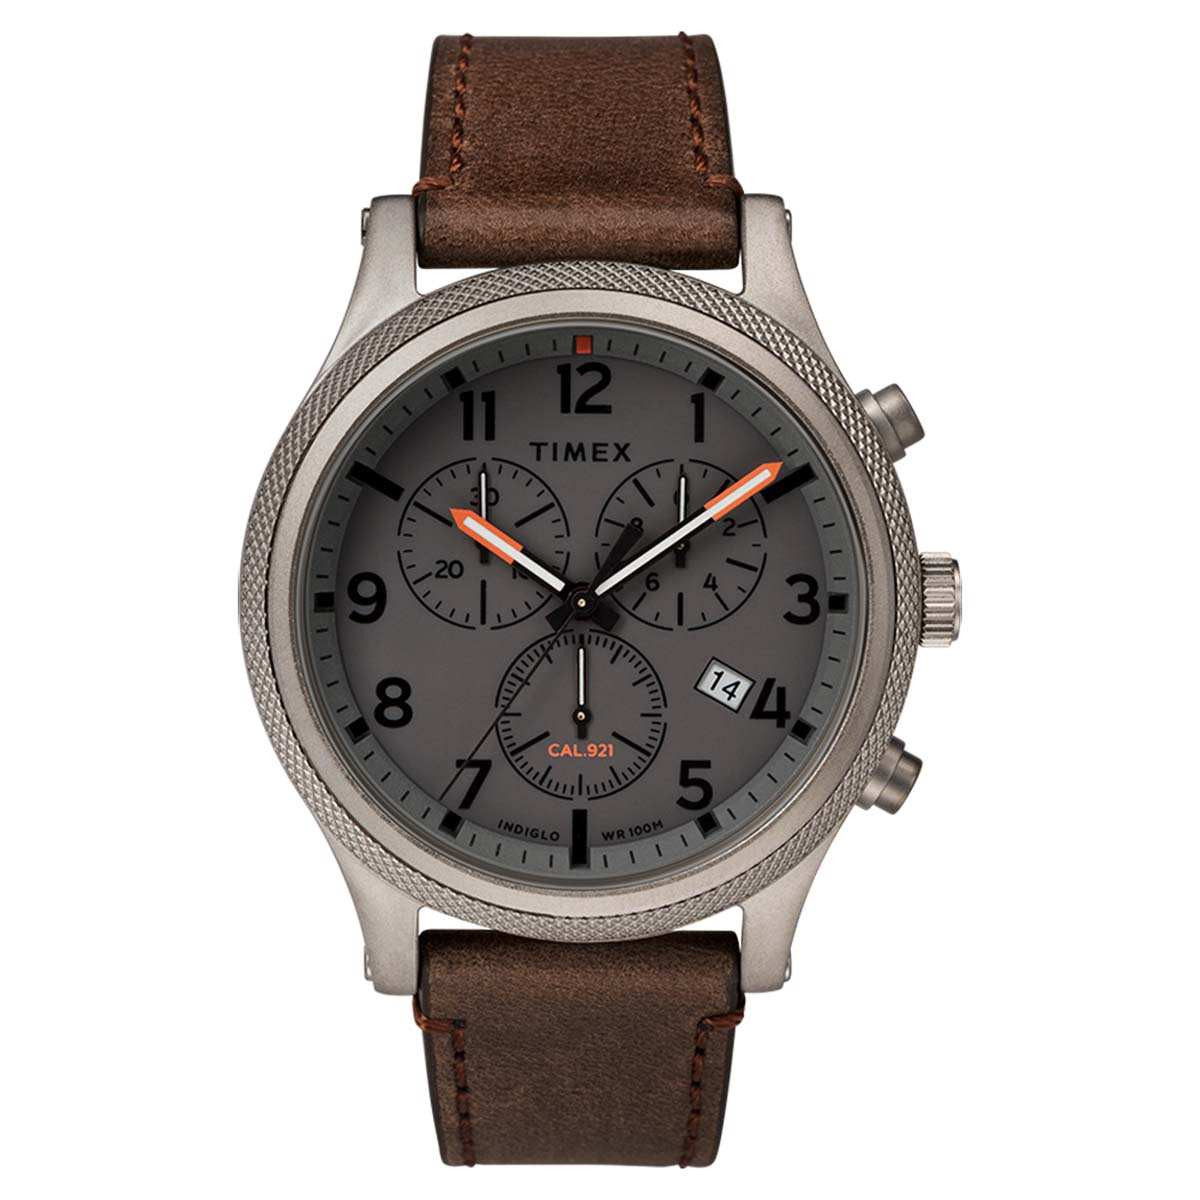 Montre Homme Timex "Allied LT Chronographe" Boîter 42mm Cadran INDIGLO® Gris - TW2T32800